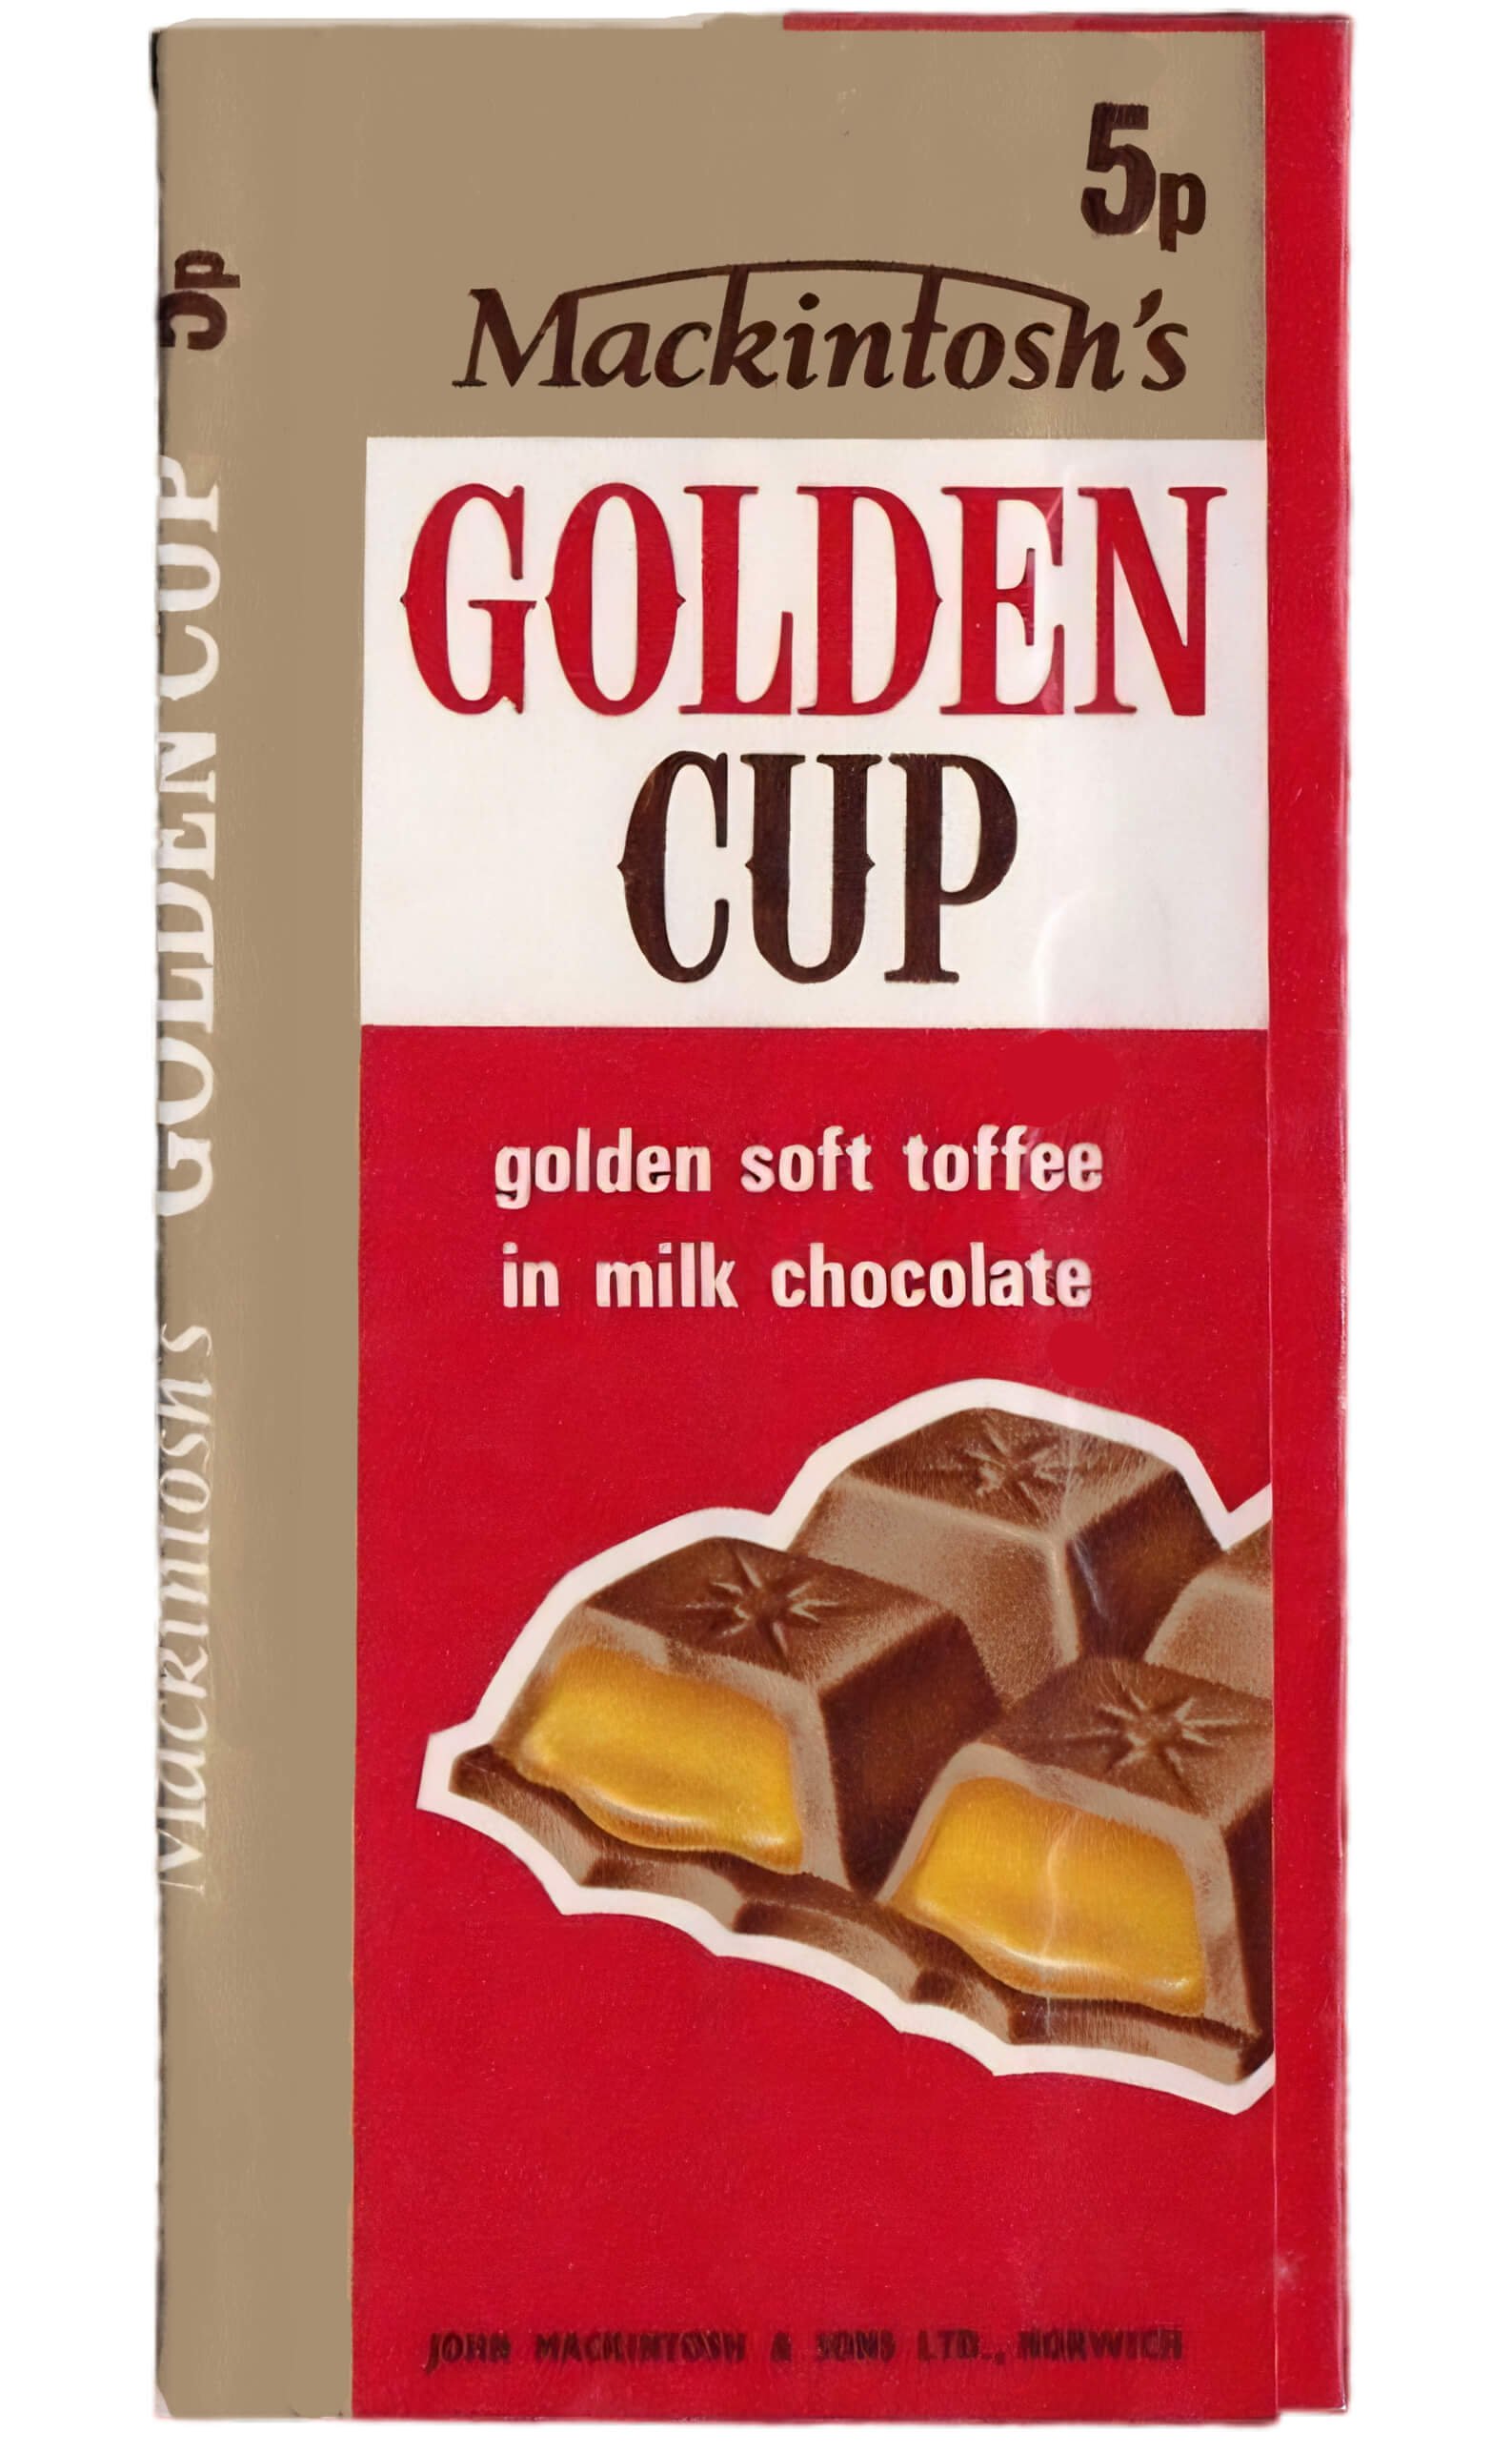 Mackintosh's Golden Cup wrapper (second version), red and gold